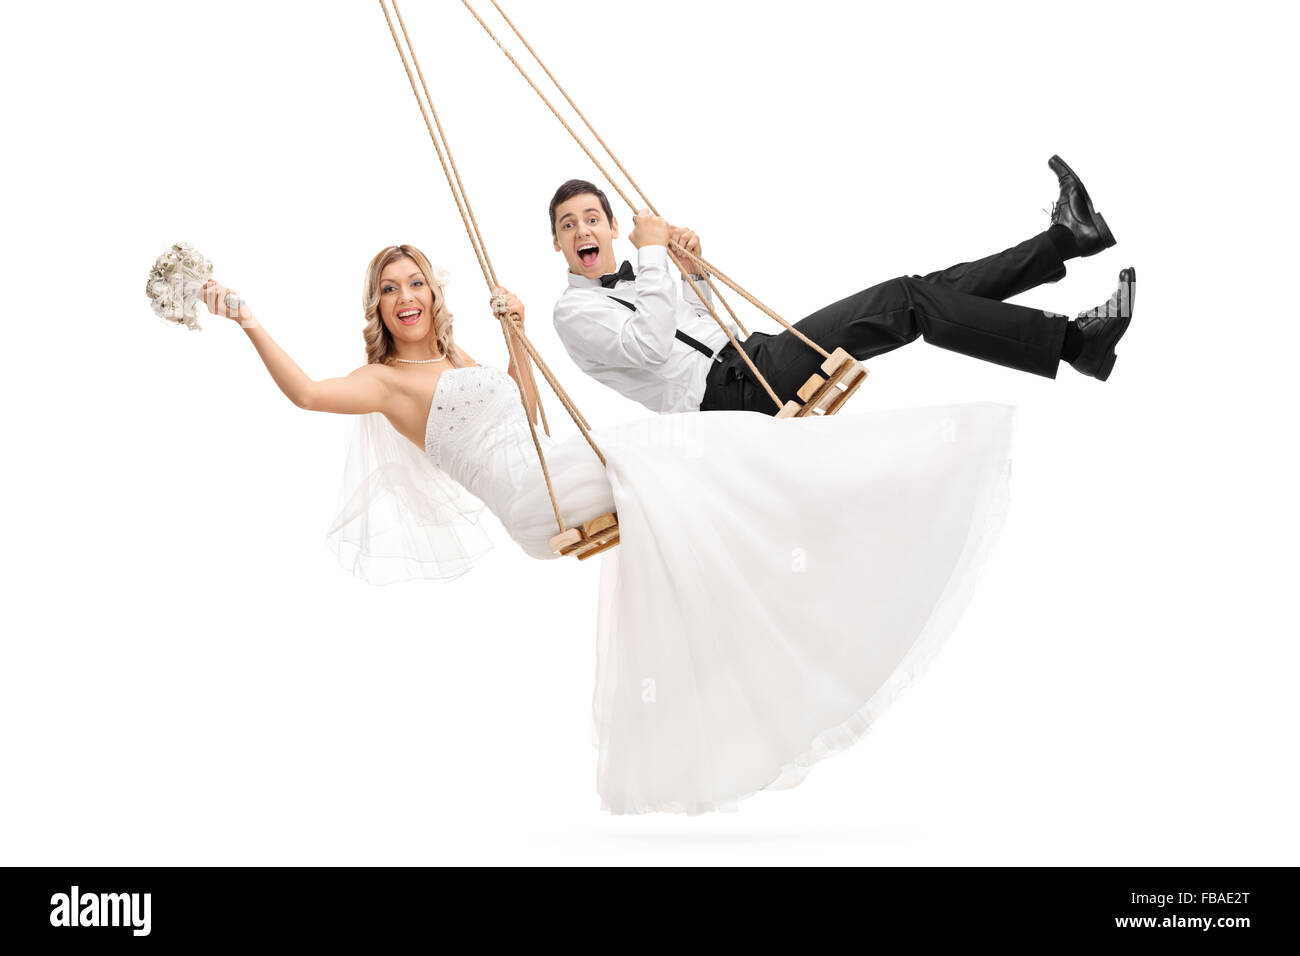 Studio shot of young groom and a bride swinging on wooden swings isolated on white background Stock Photo